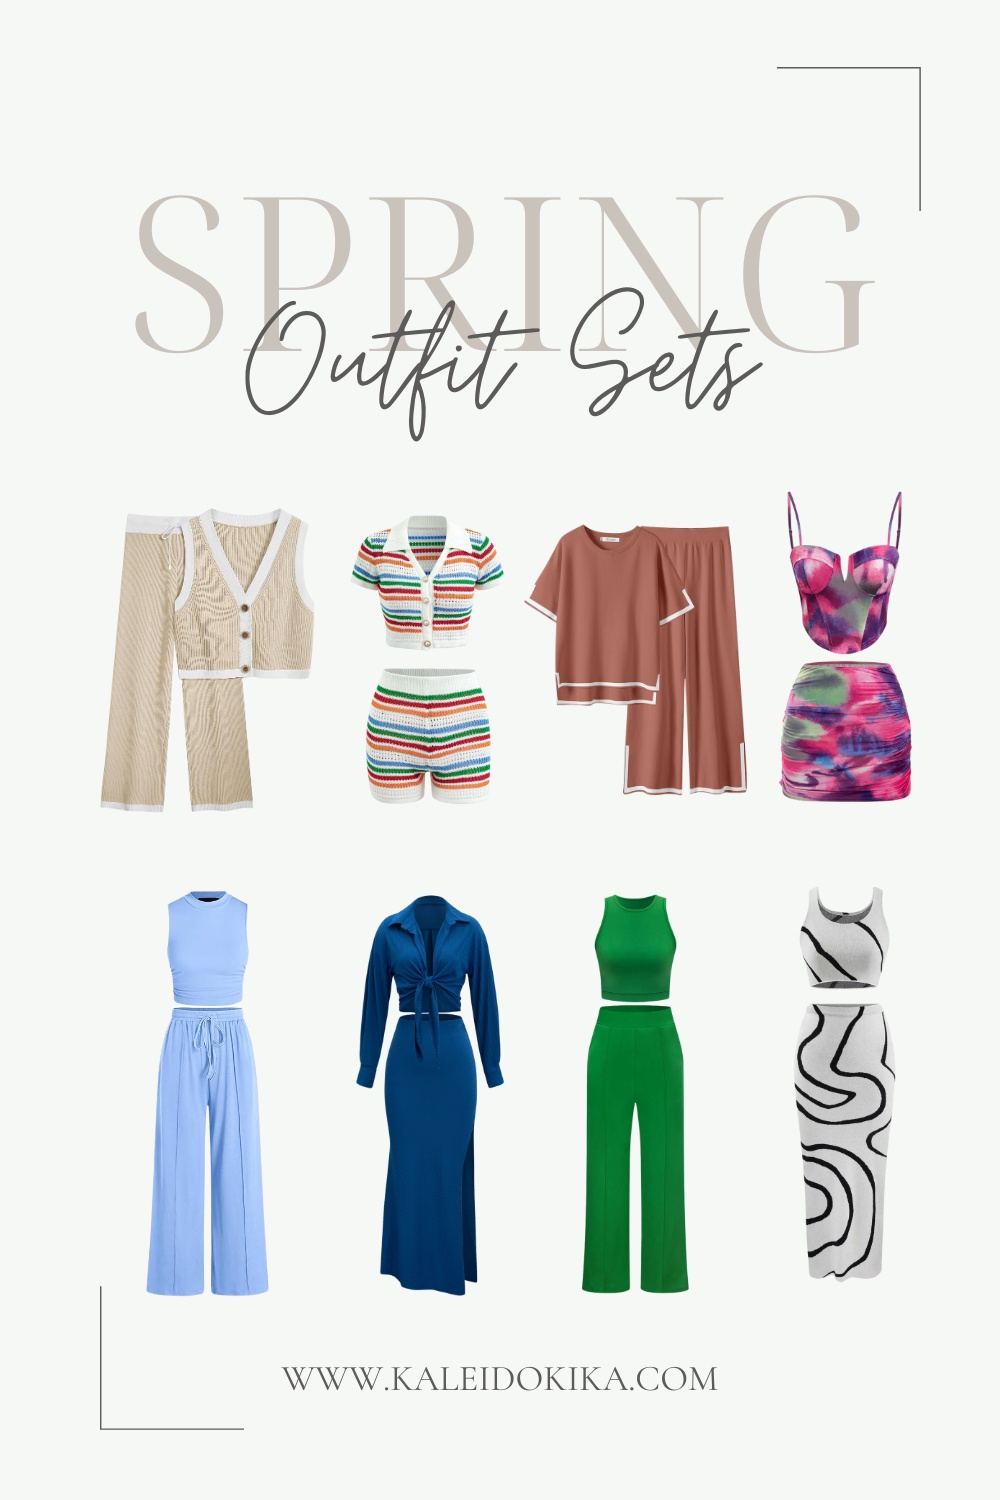 Image showing multiple matching sets outfits for spring